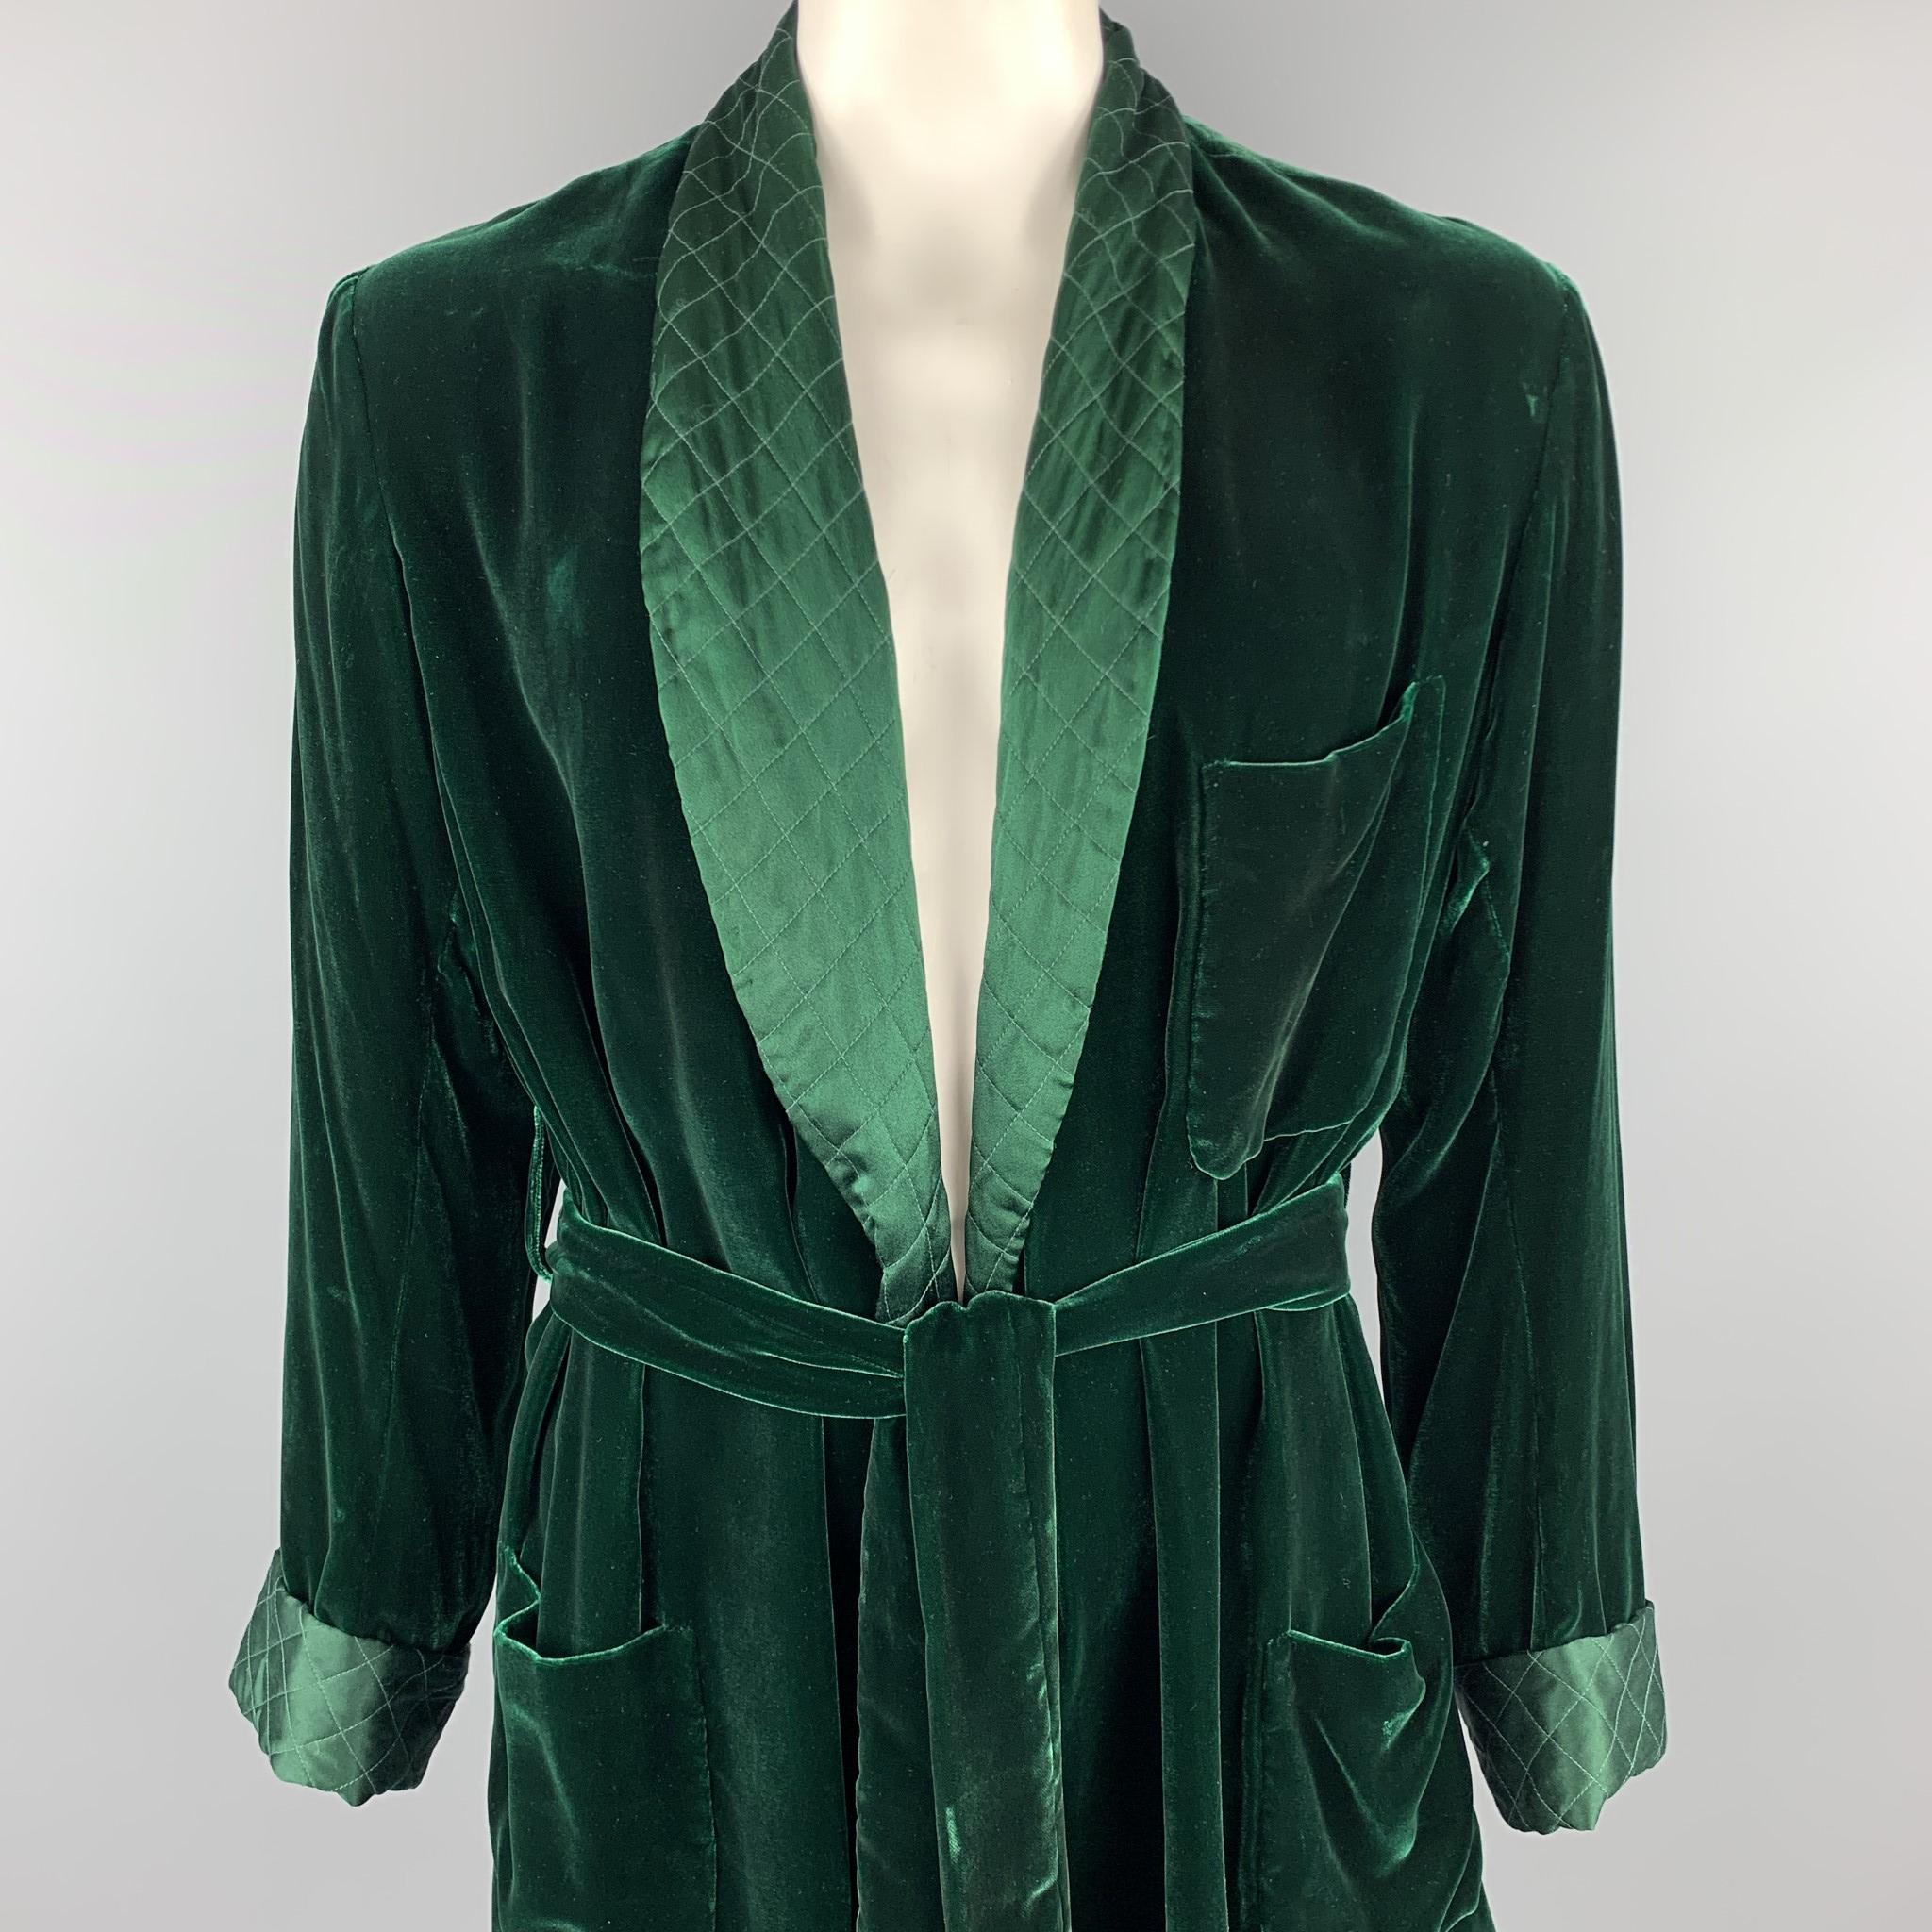 BRIONI jacket comes in a forest green silk velvet featuring a quilted shawl collar, front pockets, and a belted style.

Very Good Pre-Owned Condition.
Marked: No size marked

Measurements:

Shoulder: 17.5 in. 
Chest: 44 in. 
Sleeve: 25.5 in.